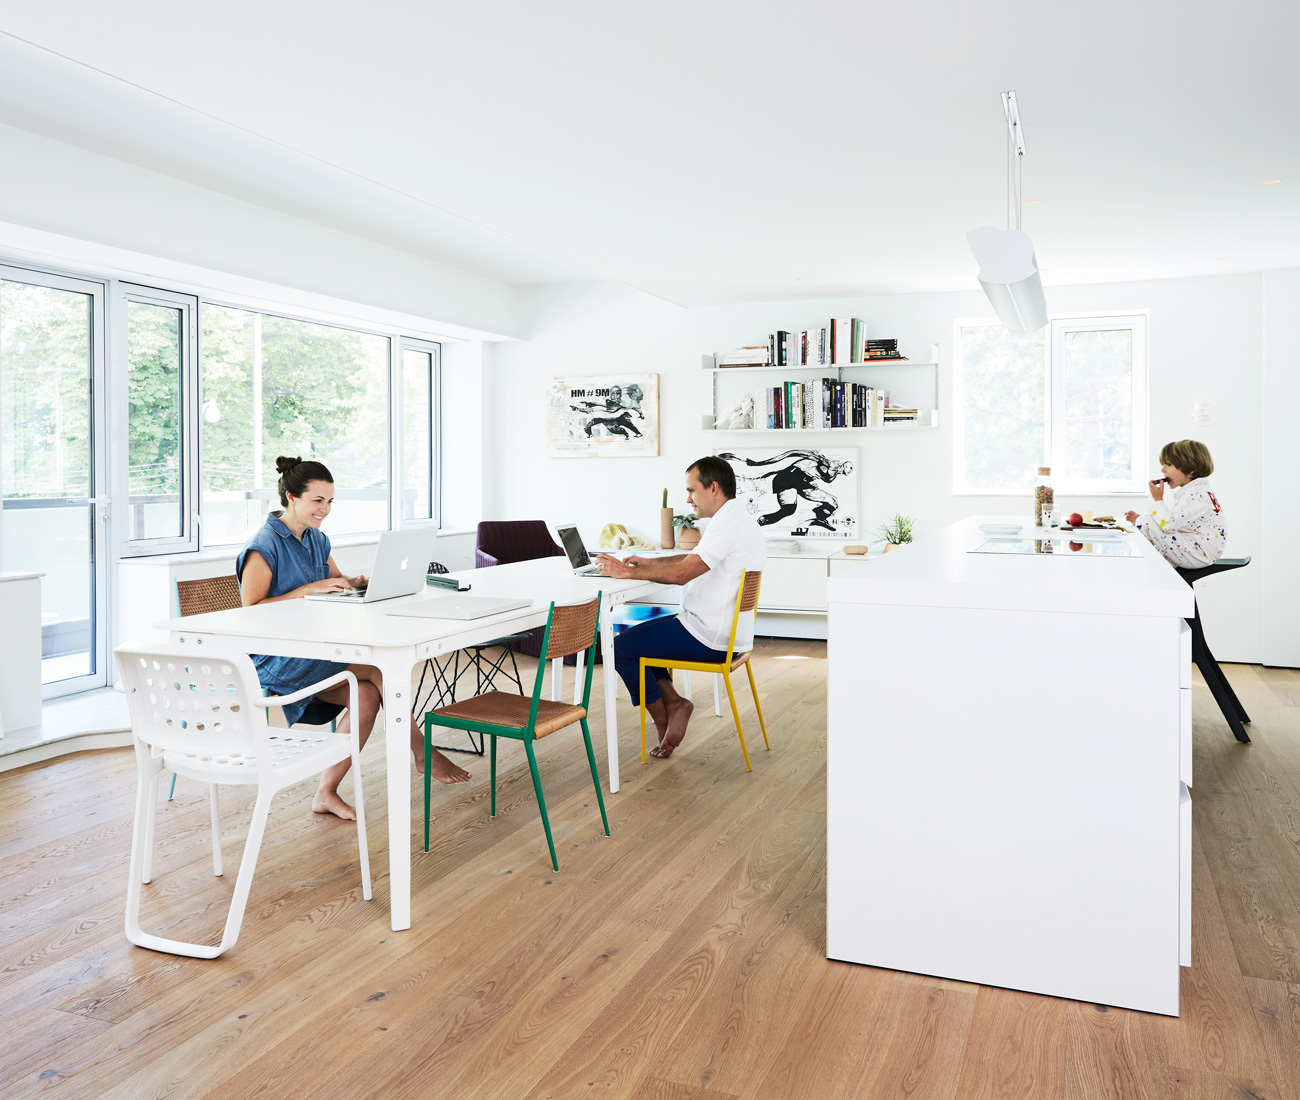 The open plan kitchen/dining space doubles as studio and family room. Flooring by Moncer; b1 kitchen system by Bulthaup; Magis table and red Vitra armchair available at Quasi Modo. Photo by Naomi Finlay.